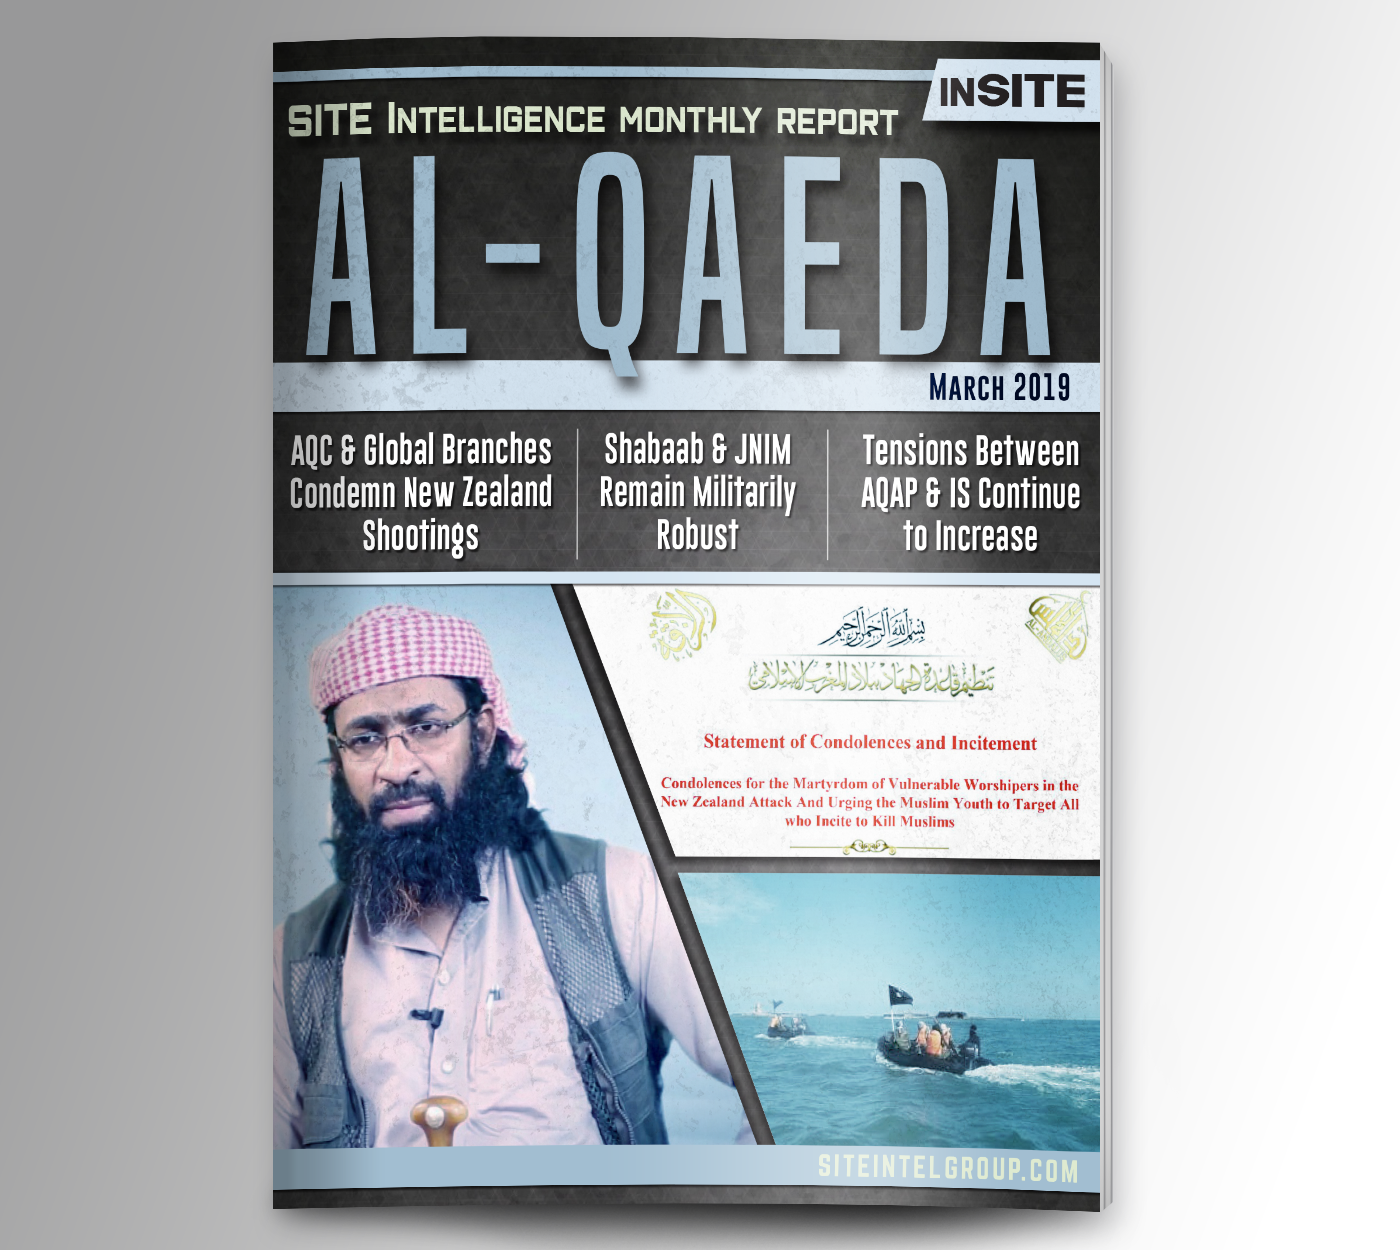 Monthly inSITE Report on Al-Qaeda for March 2019